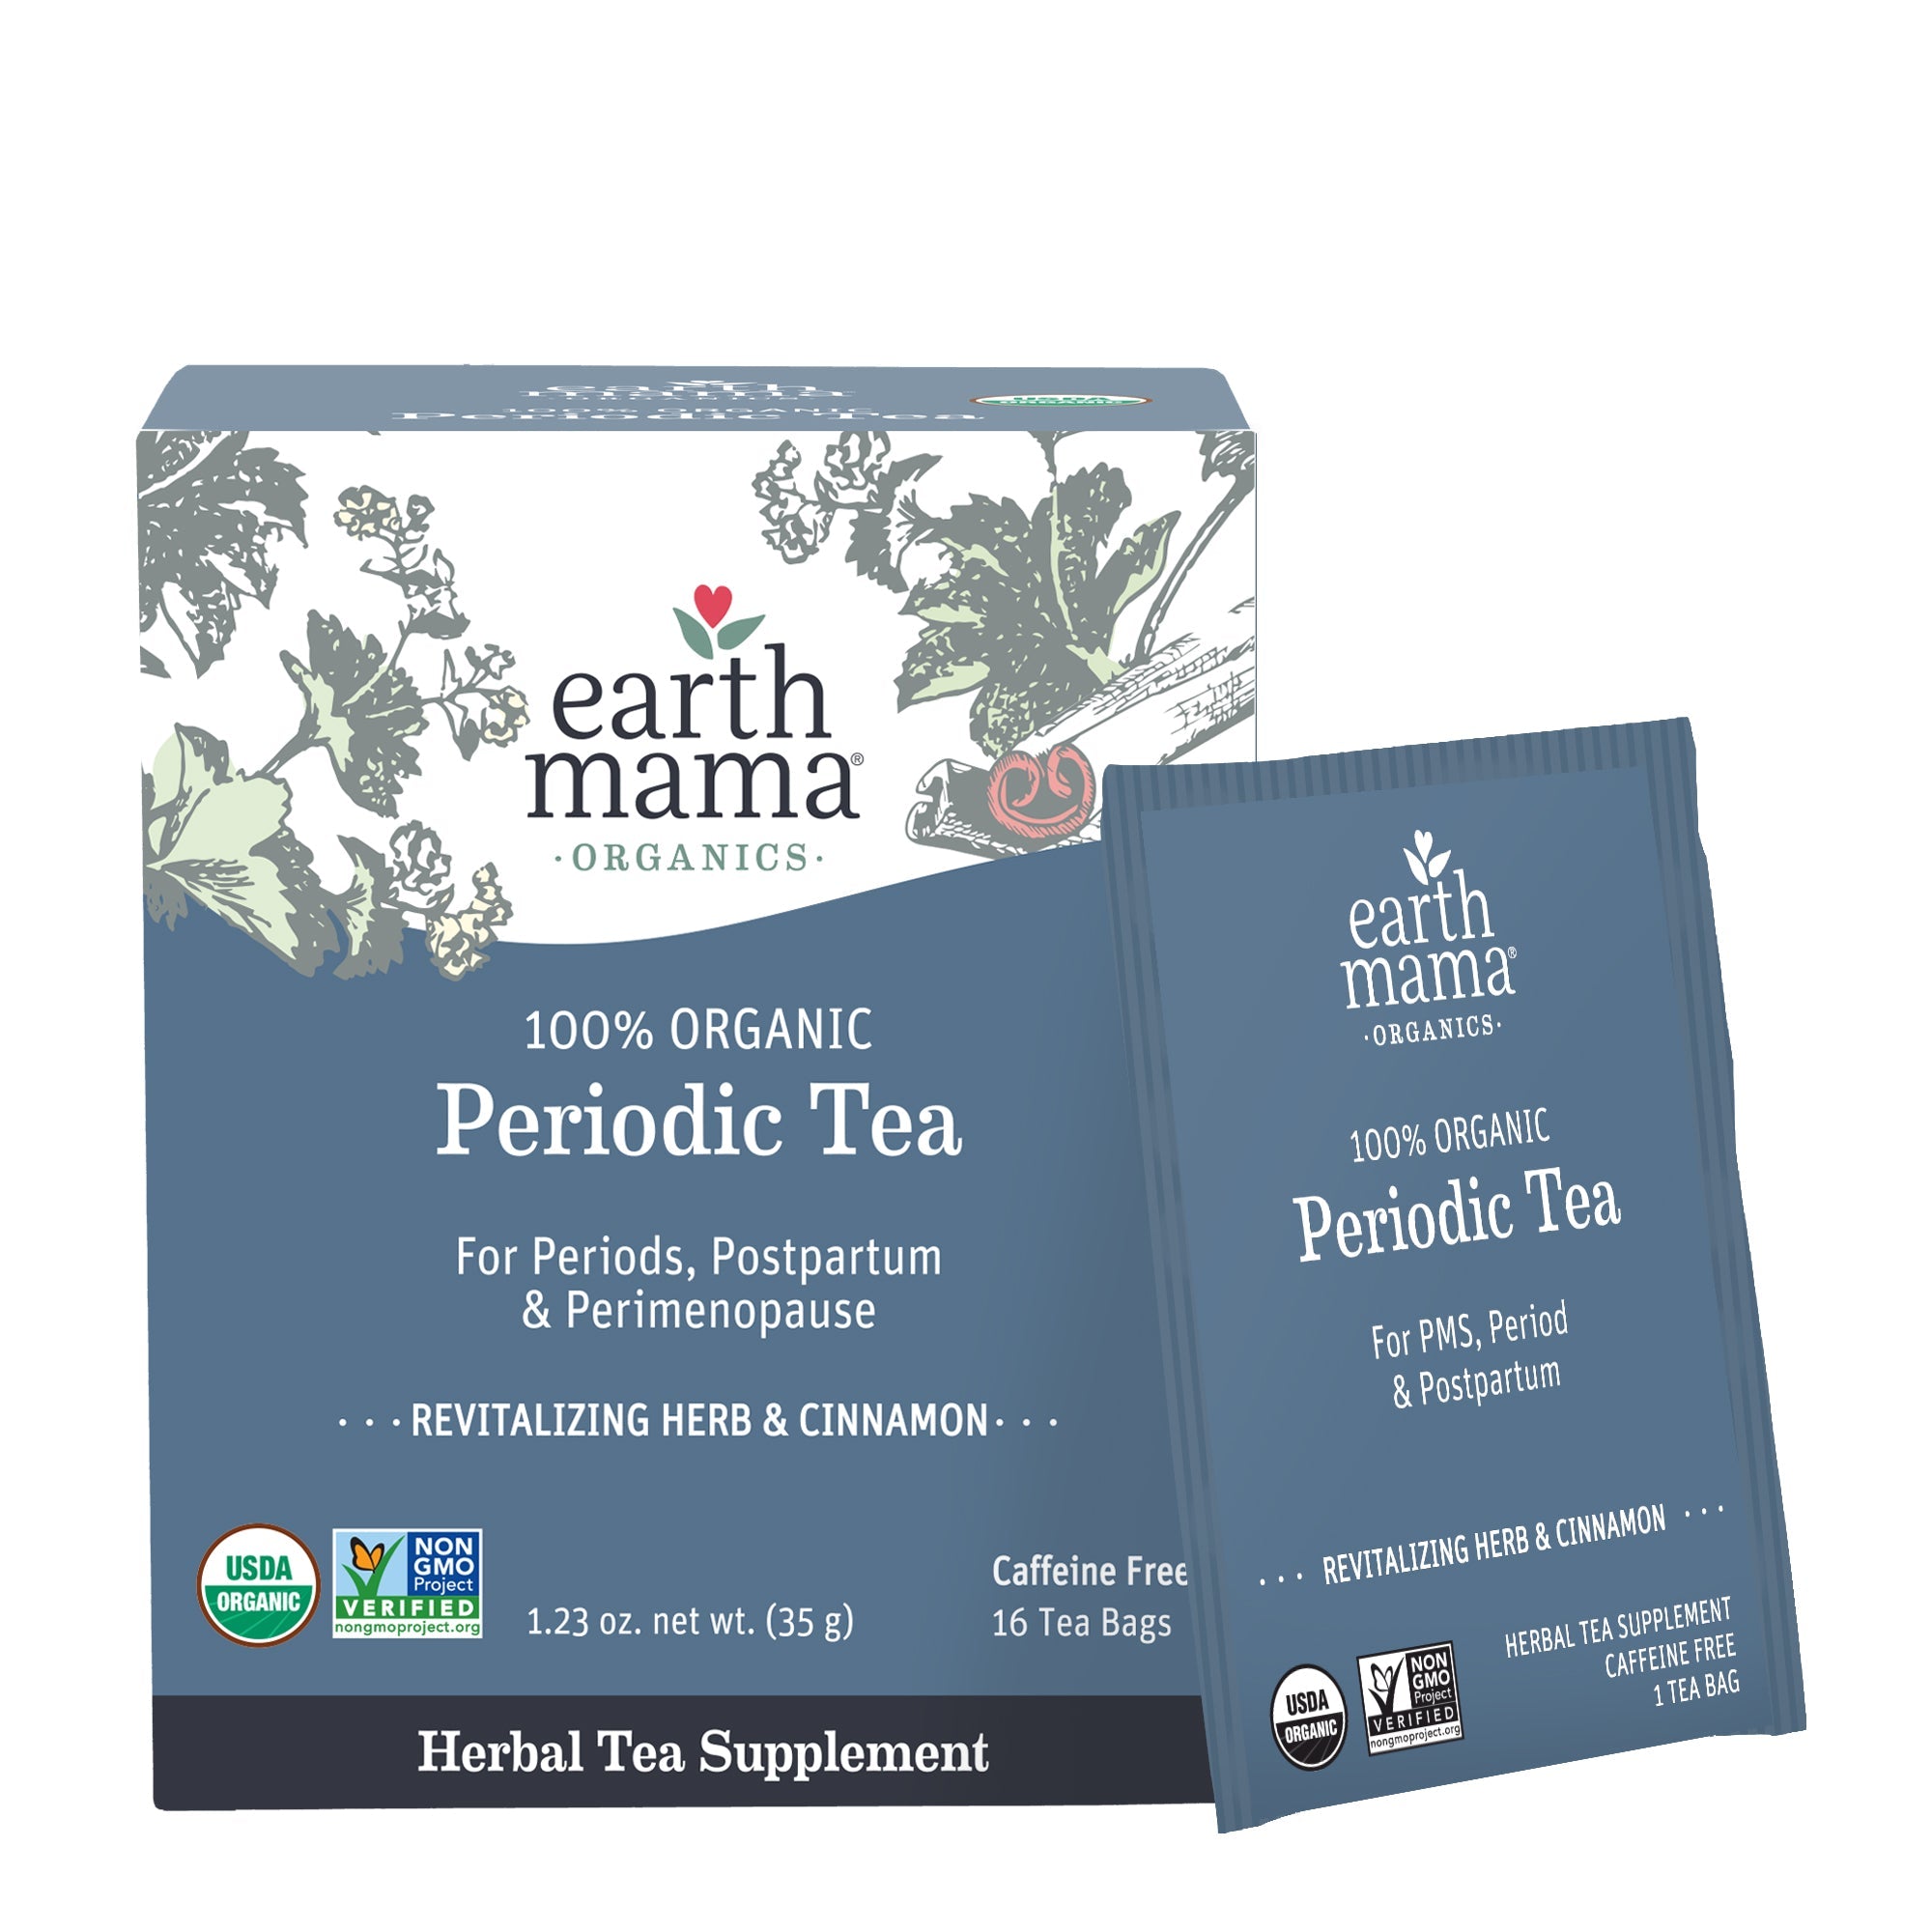 Ease PMS, periods & postpartum naturally! Organic Periodic Tea - cinnamon herbal blend for women. Caffeine-free, individually wrapped, breastfeeding-safe. Shop now!